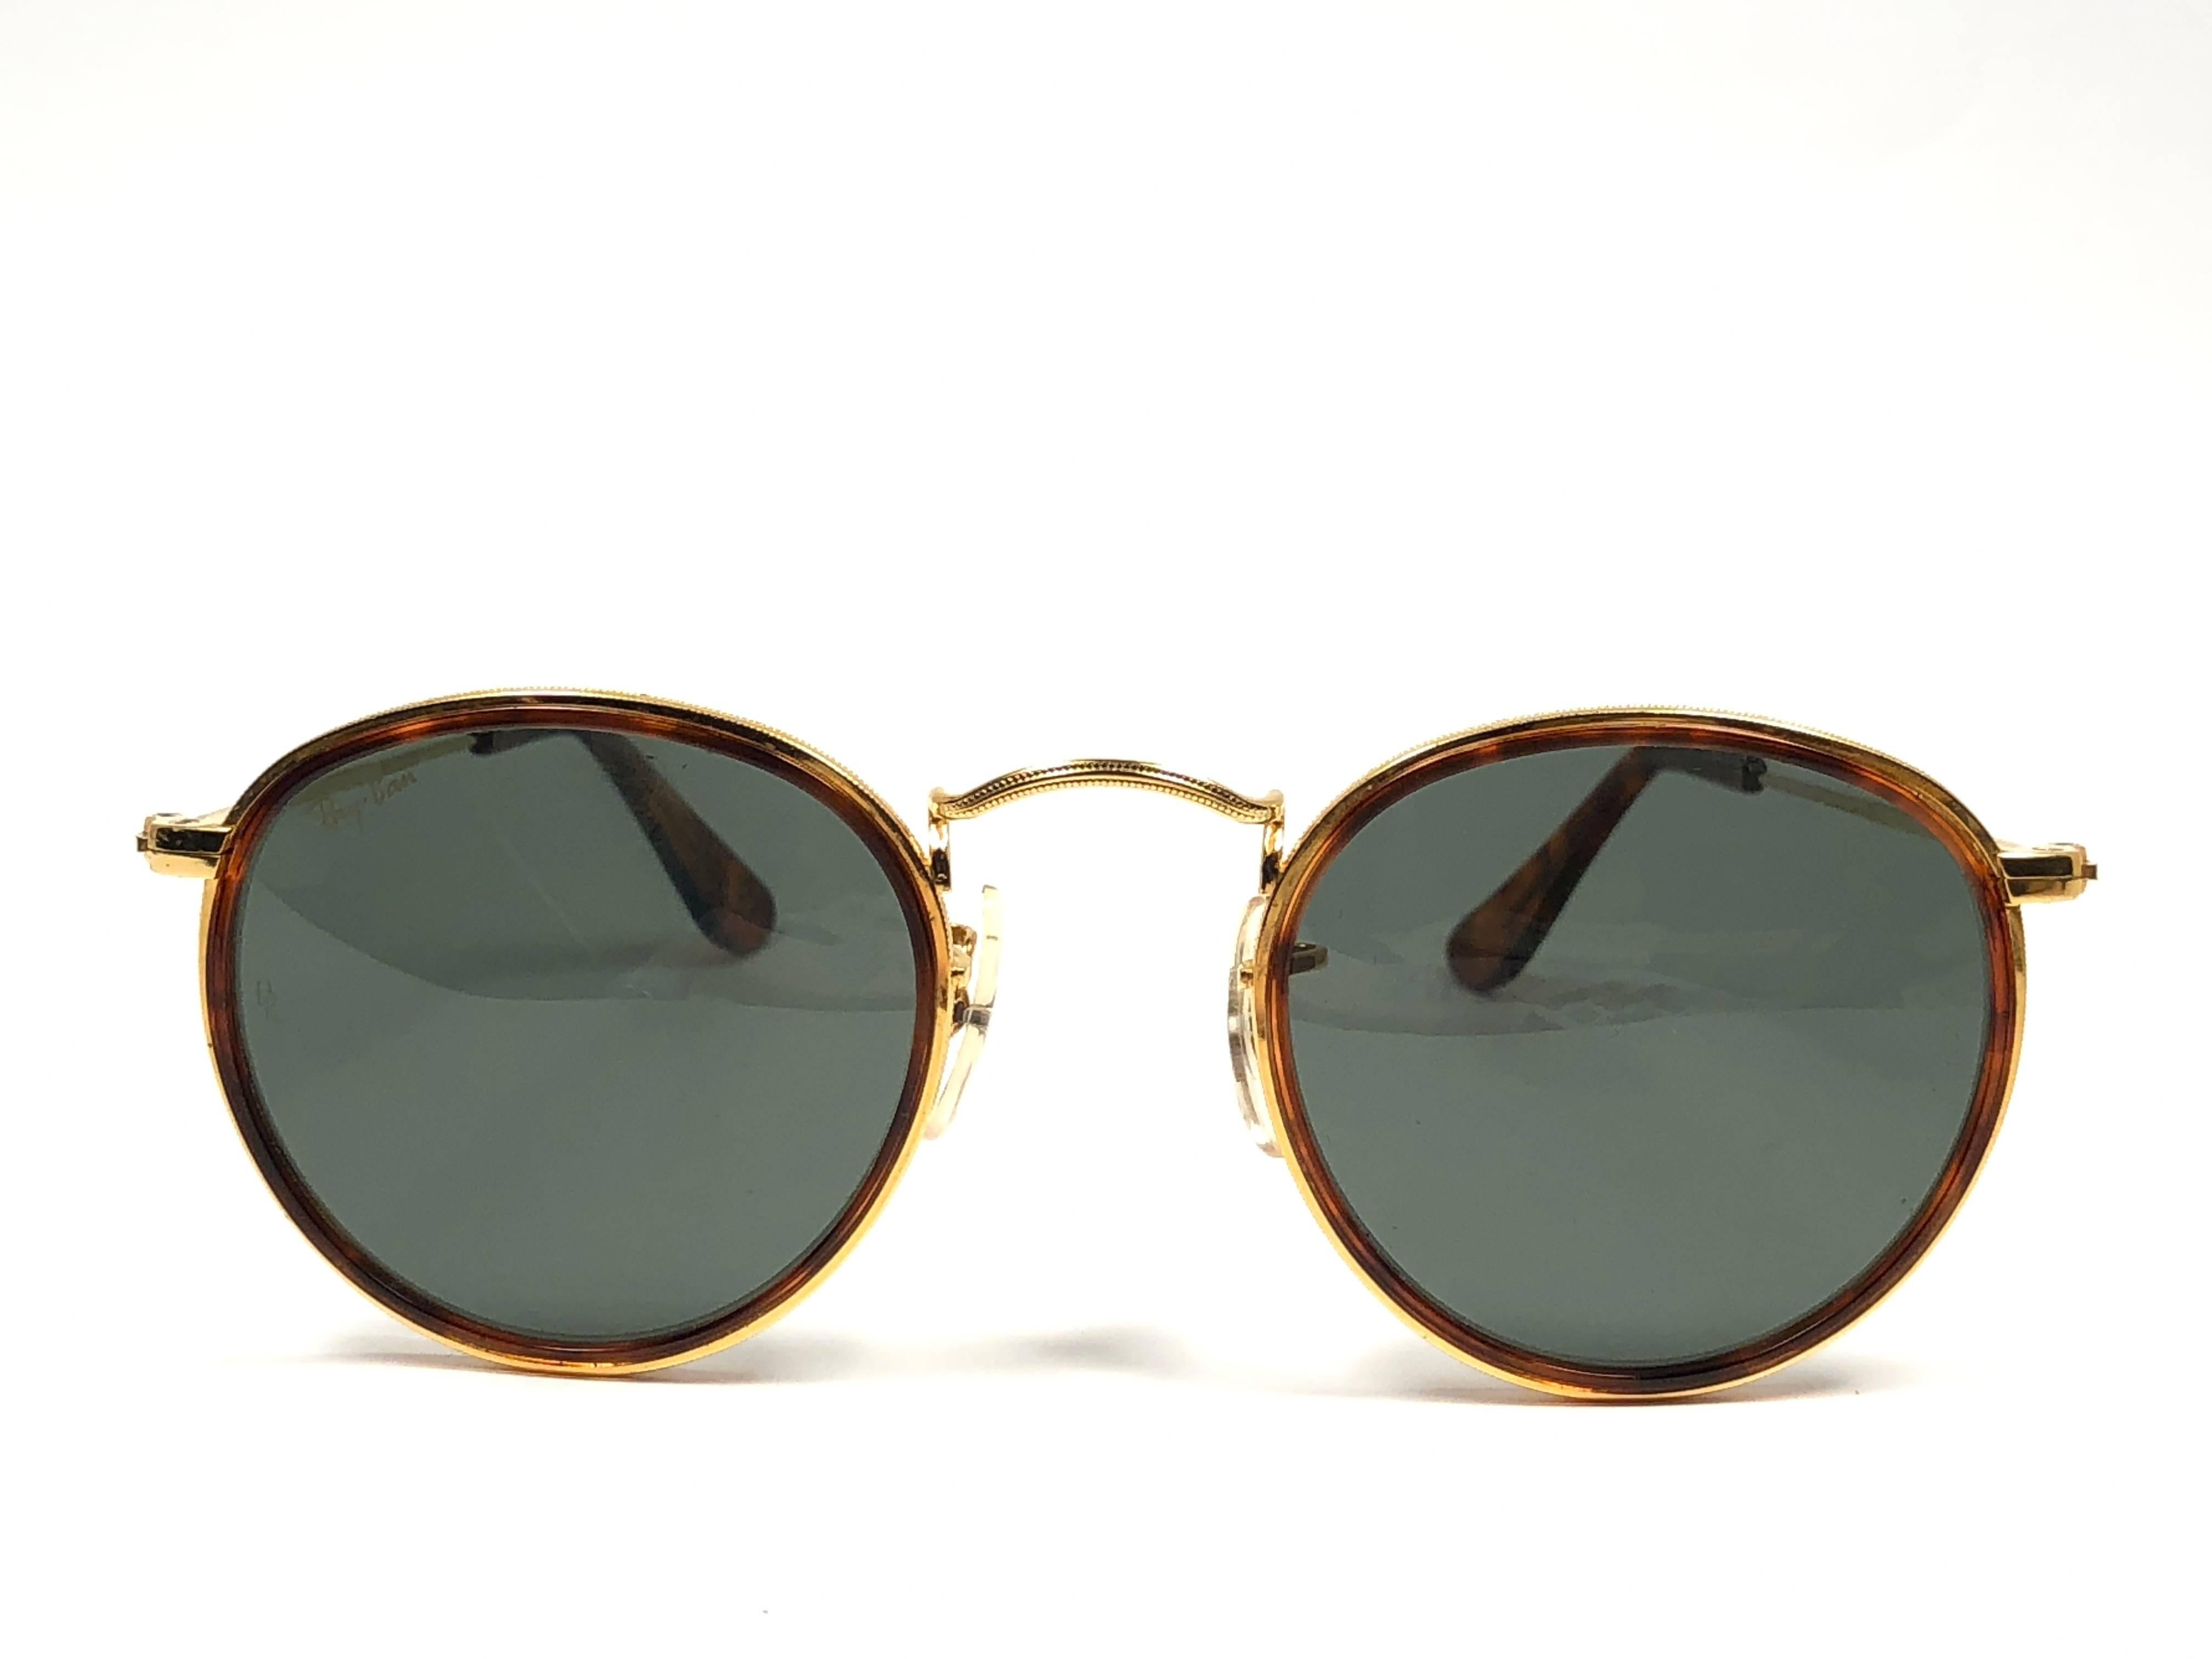 New Vintage Ray Ban classic round frame with tortoise inserts sporting G15 grey lenses.
Comes with its original Ray Ban B&L case with minor sign of wear due to storage.  

FRONT : 12.5 CMS
LENS HEIGHT : 4.6 CMS
LENS WIDTH :4.8 CMS
